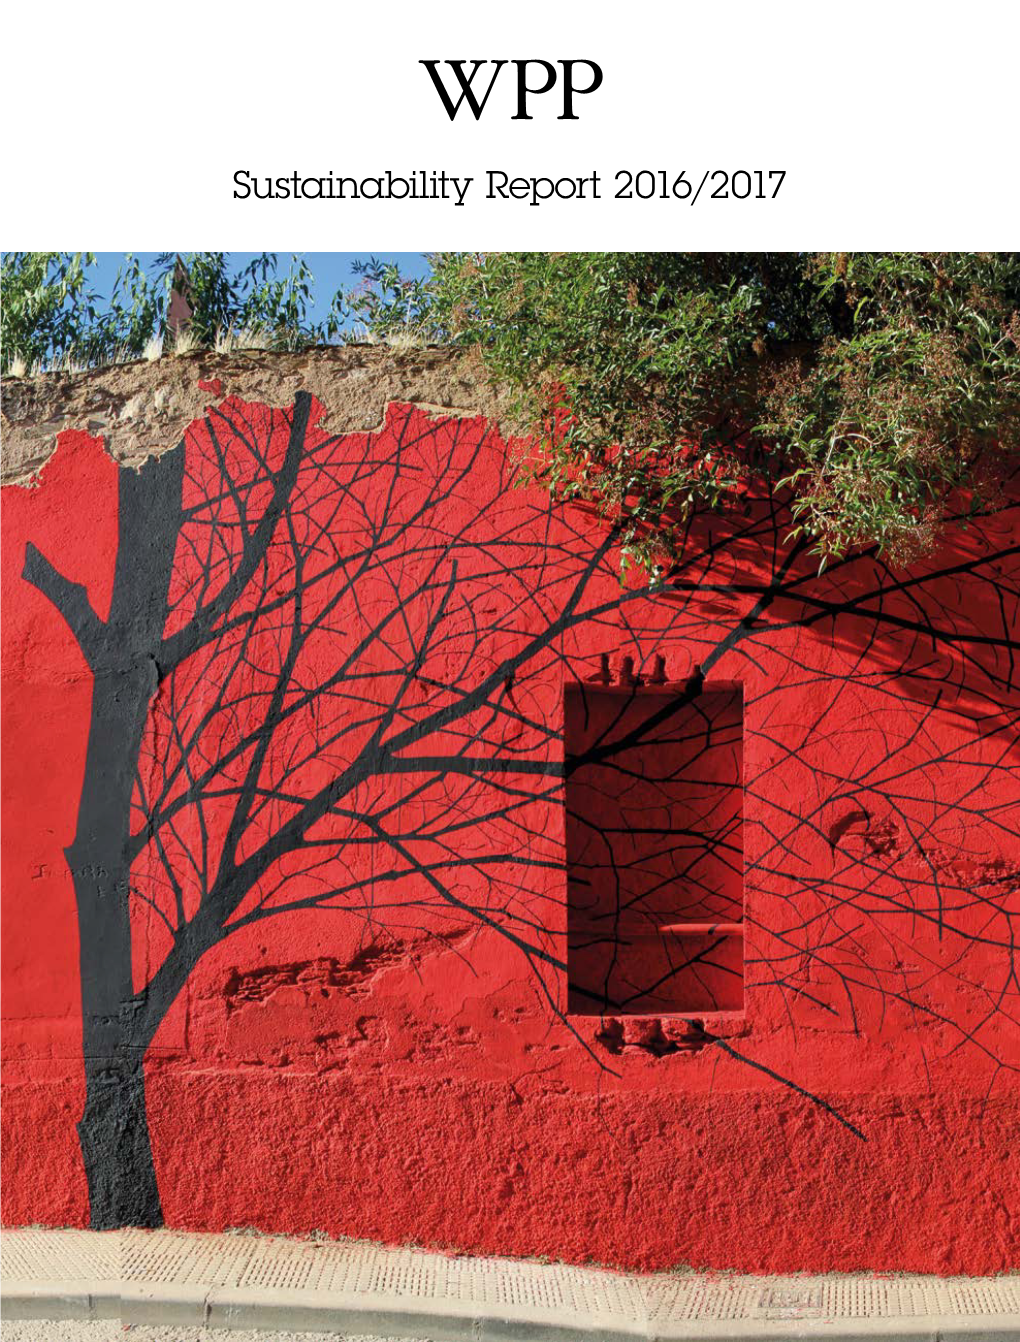 Sustainability Report 2016/2017 Sustainability Report 2016/2017 Contents